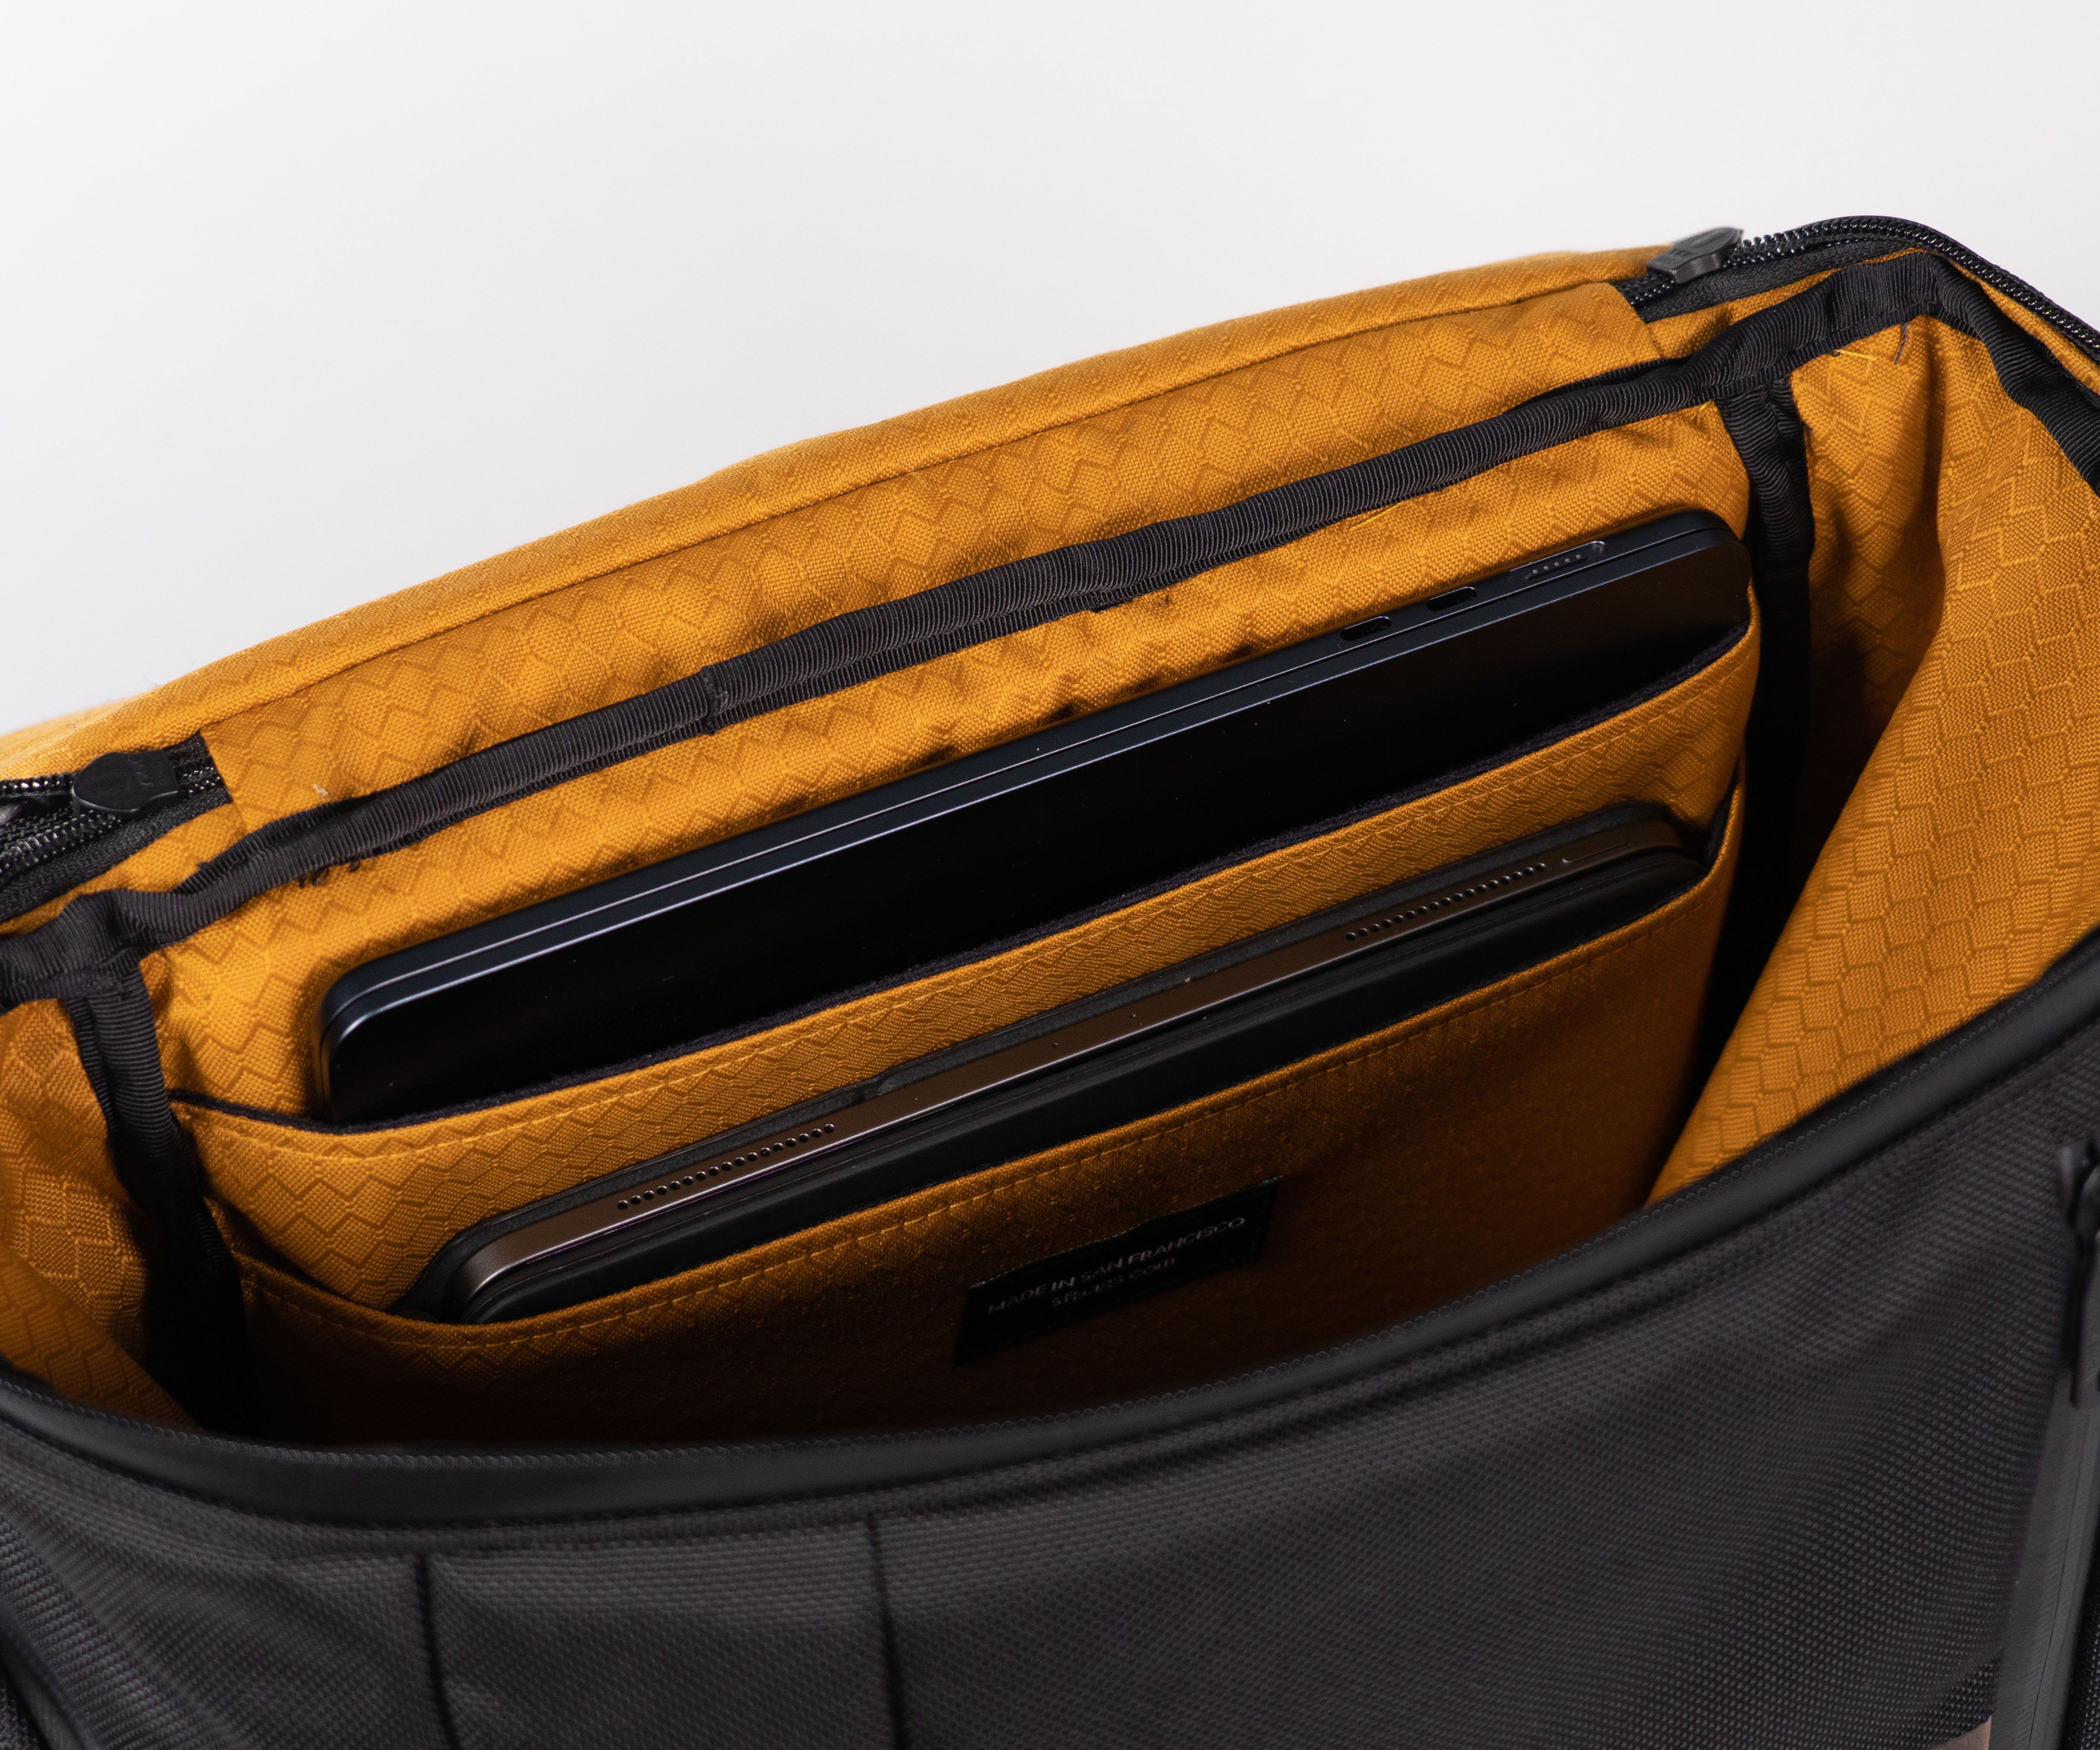 Plush laptop and tablet compartments